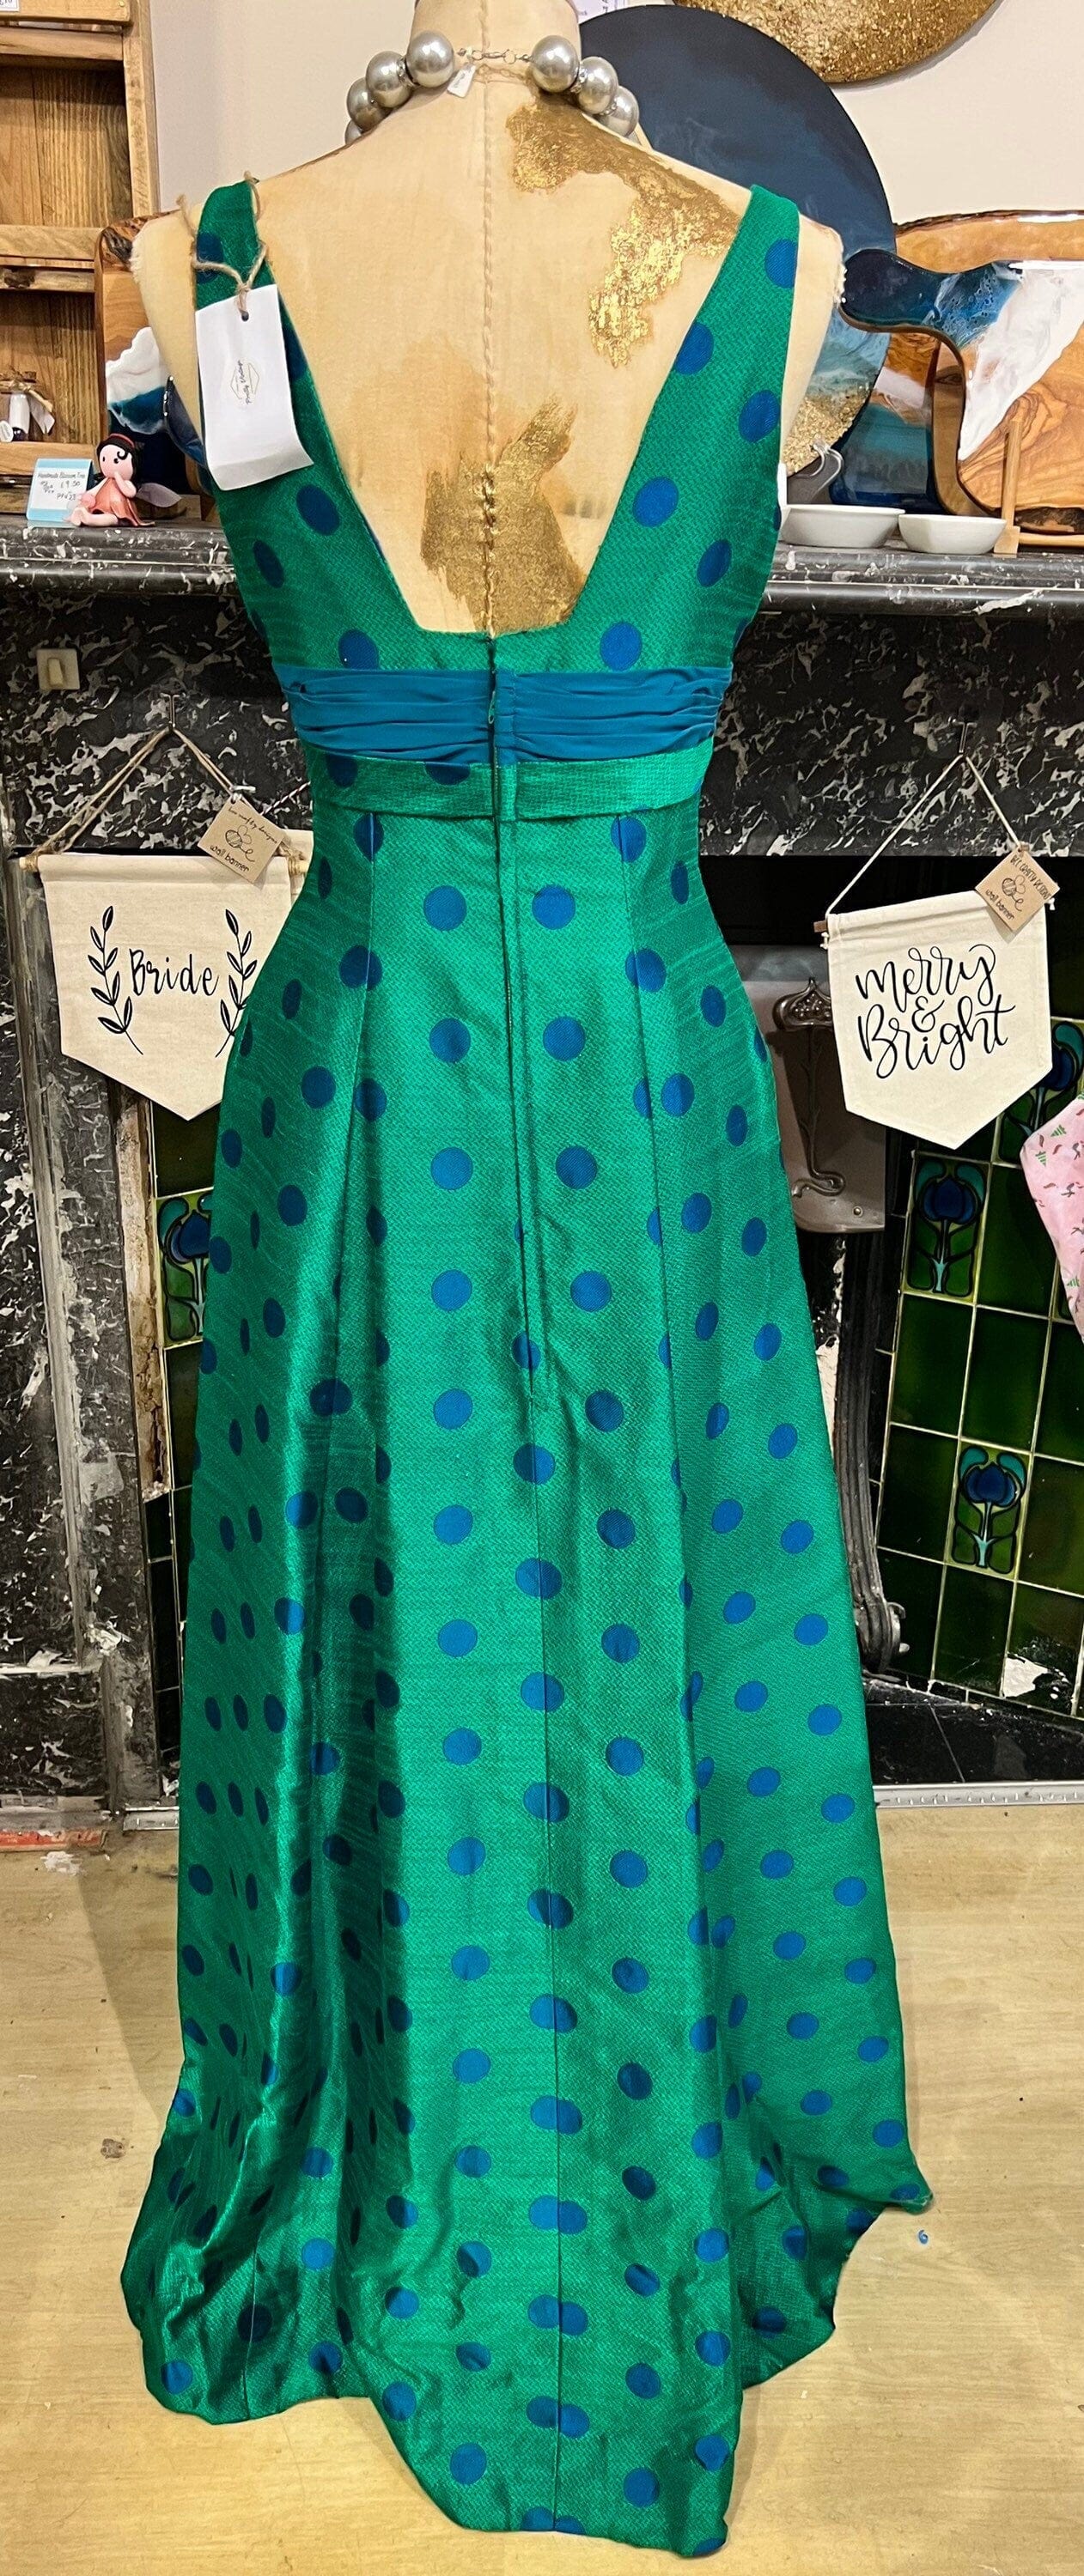 Vintage Dress Silk Maxi - Immaculate Condition - Jean Allen 1960s - Silk Embroidered - Polka Dots - Green Blue 60s green dress